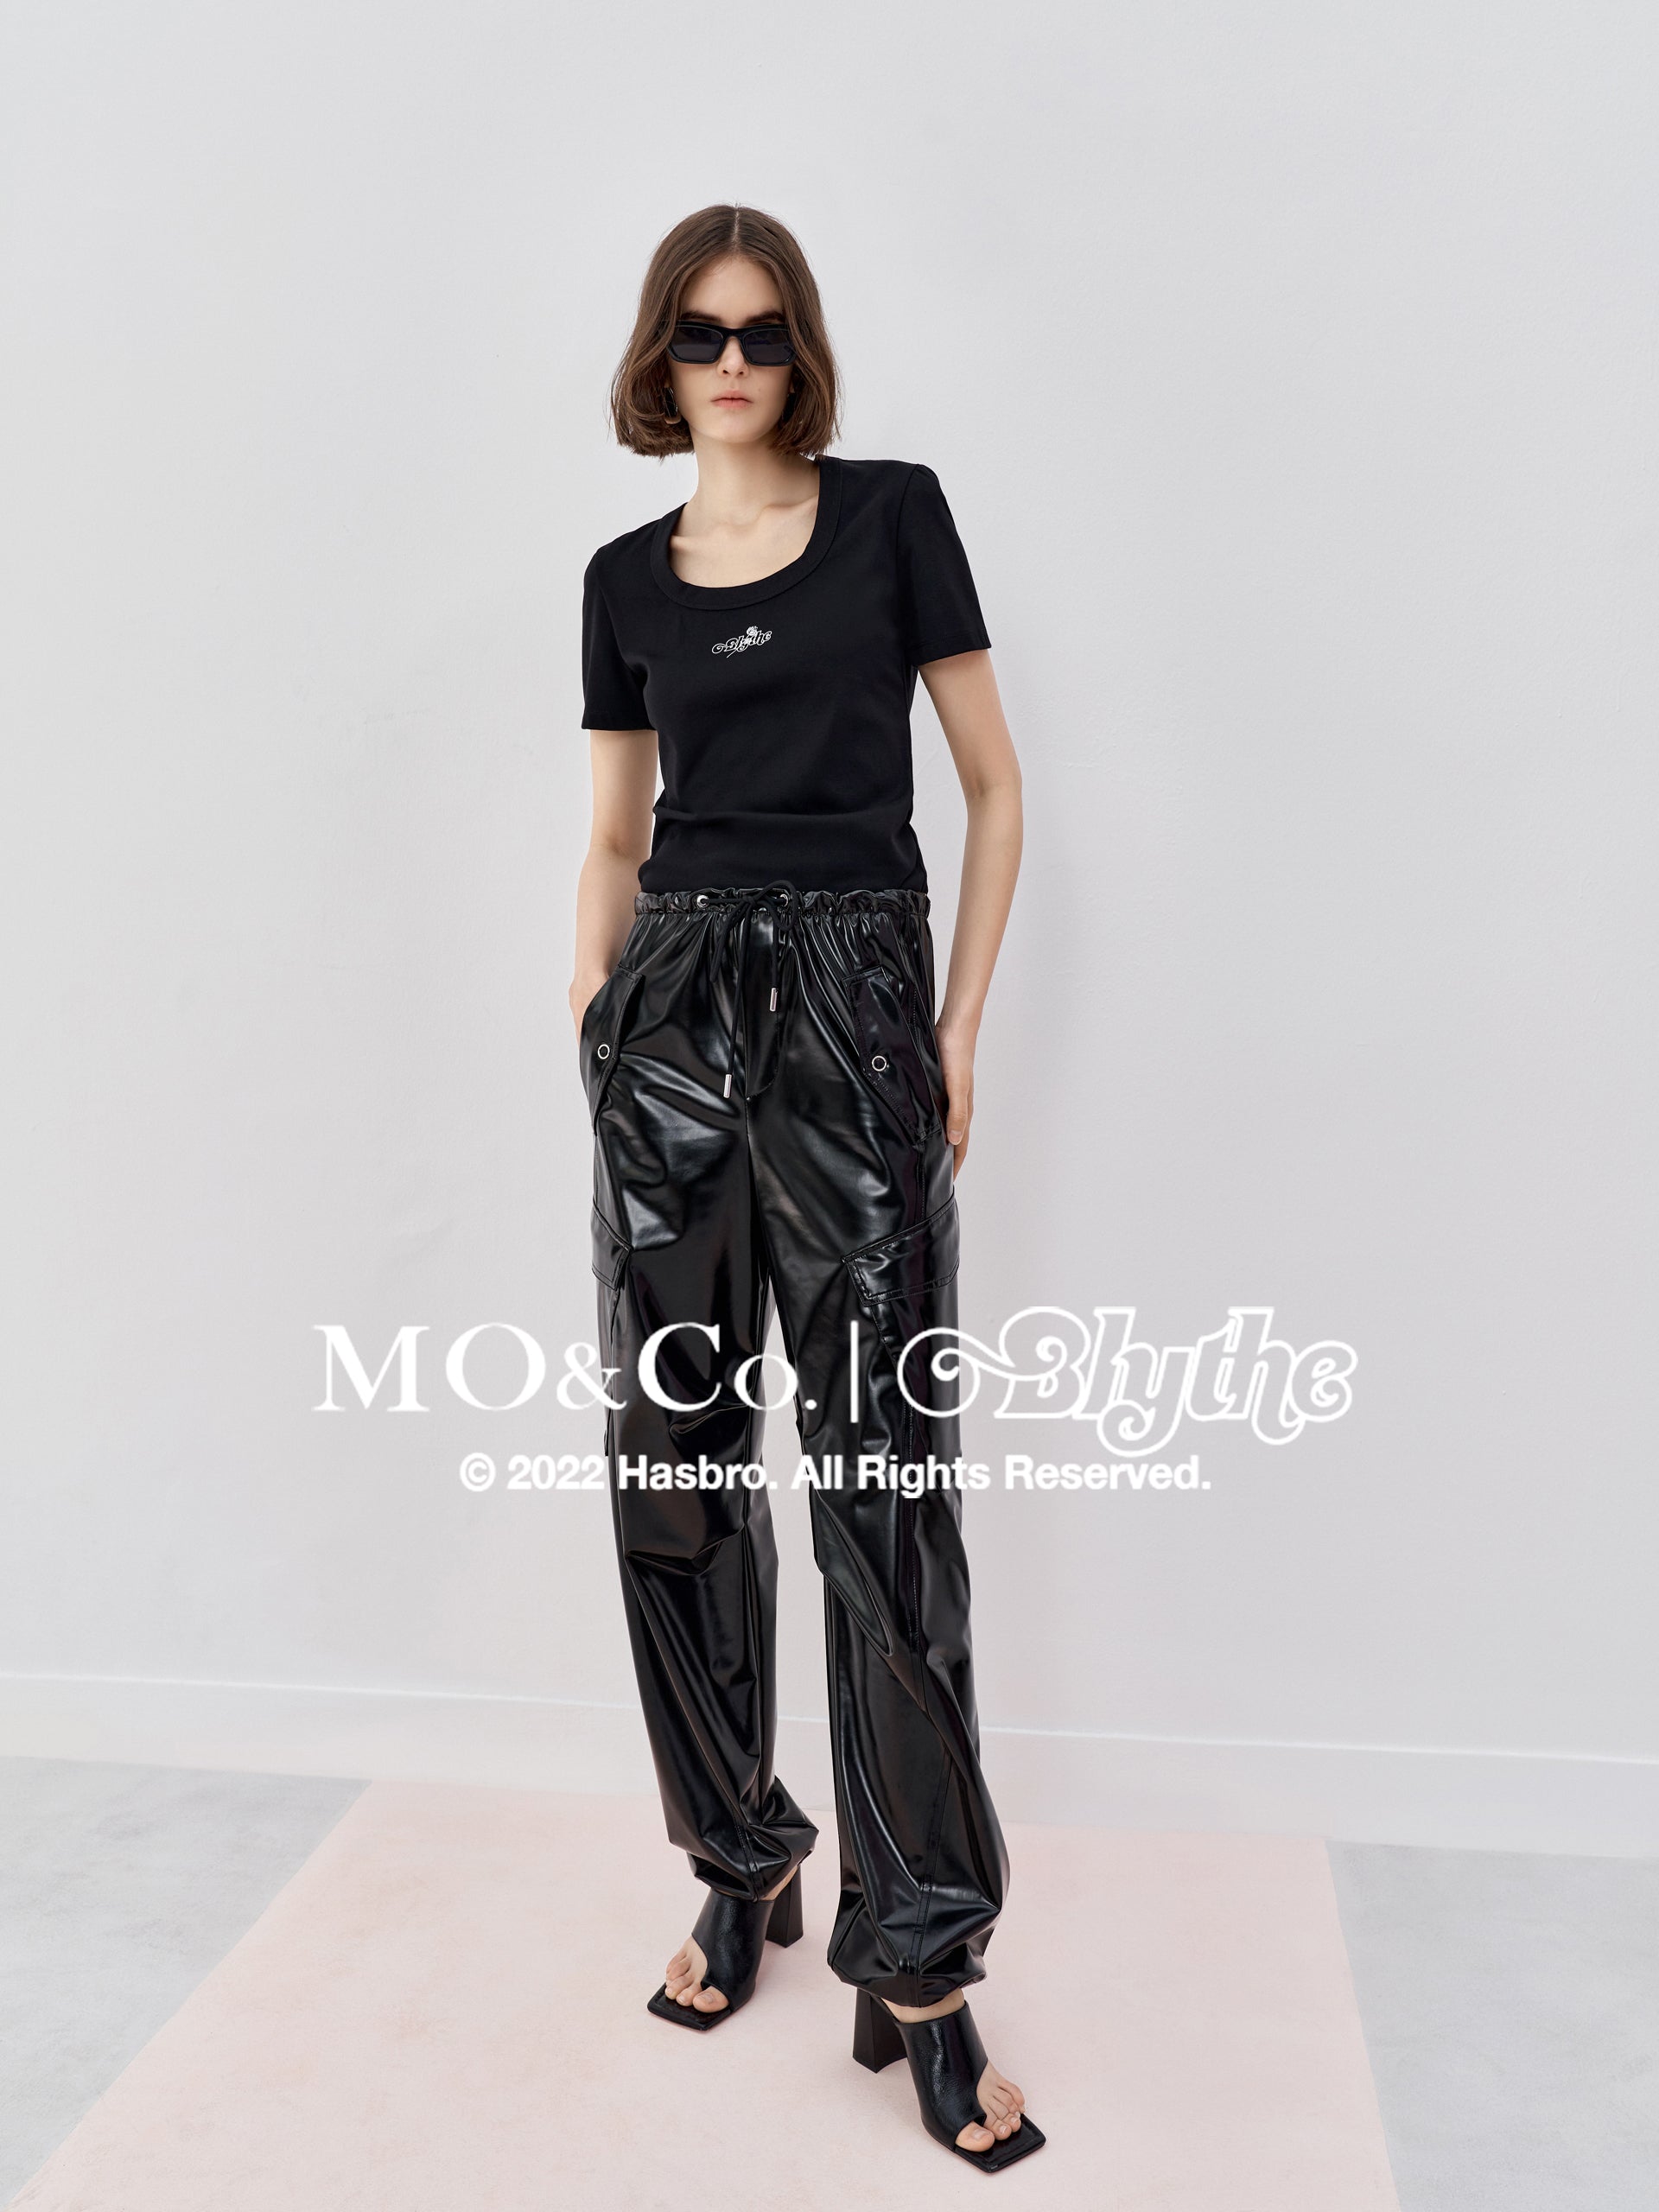 MO&Co.｜Blythe Collaboration Rose Print Crew Neck T-Shirt Fitted Casual Round Neck  Black Tshirts